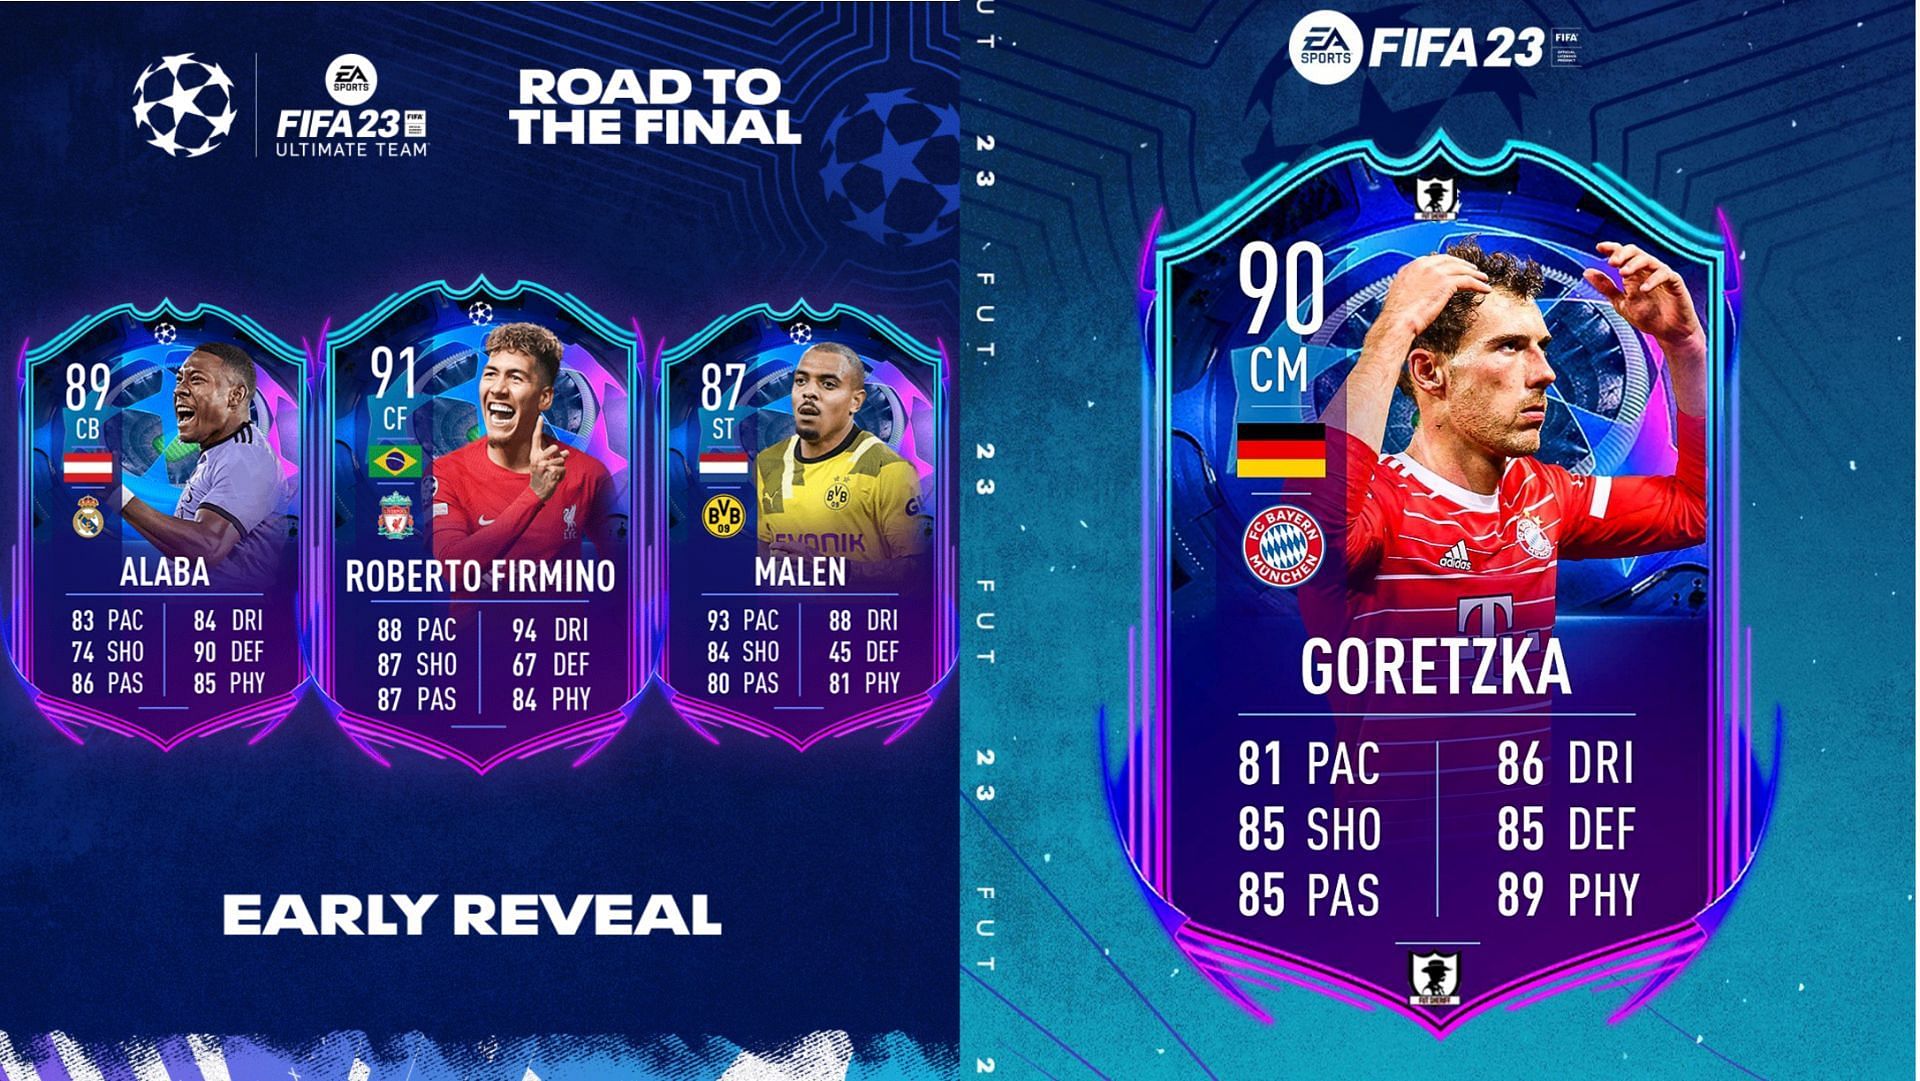 FIFA 23 players can get some amazing Road to the Final (RTTF) promo items from the UEFA Champions League (Images via EA Sports, Twitter/FUT Sheriff)